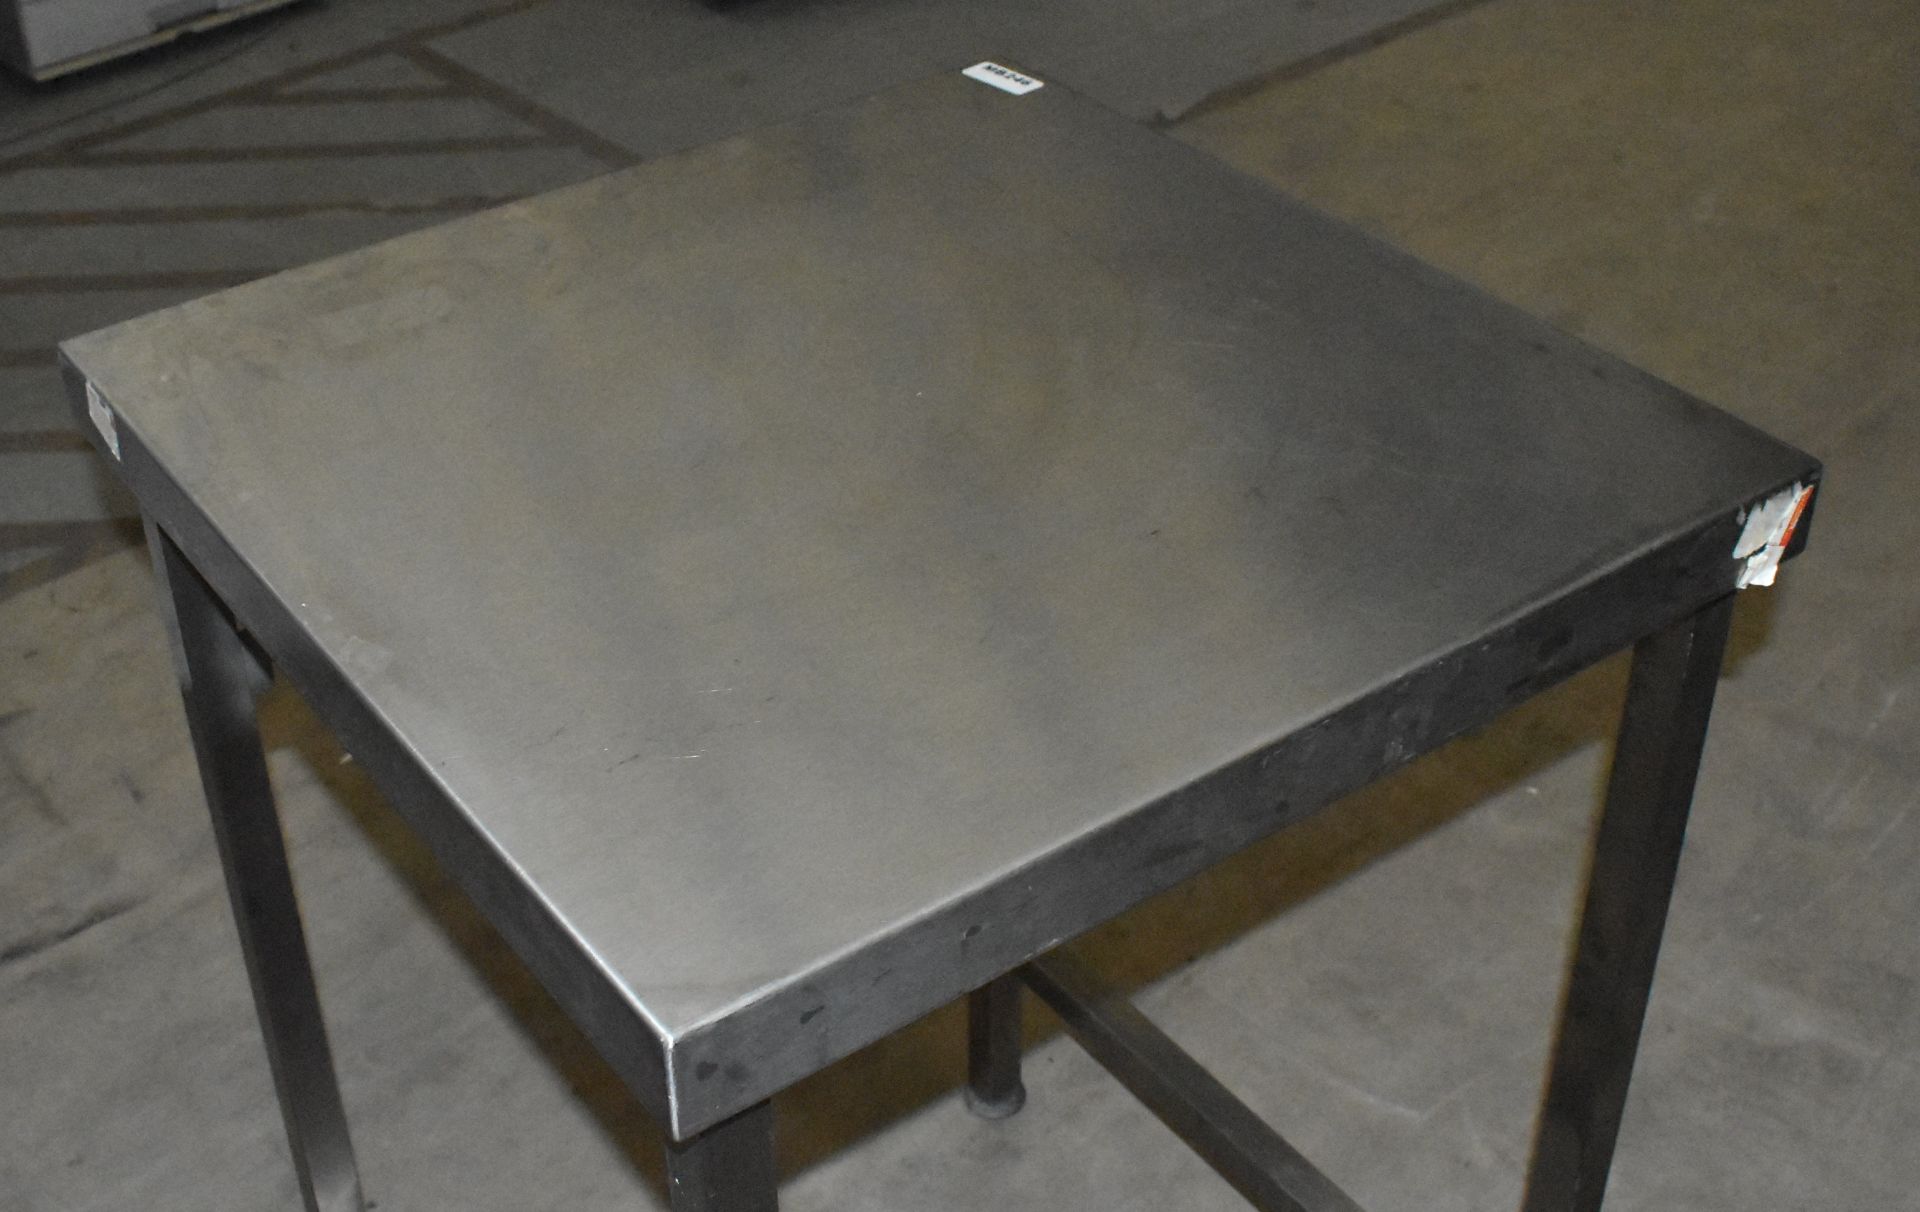 1 x Stainless Steel Prep Table - H86 x W60 x 60 cms - CL453 - Ref MB246 - Location: Altrincham WA14 - Image 2 of 2